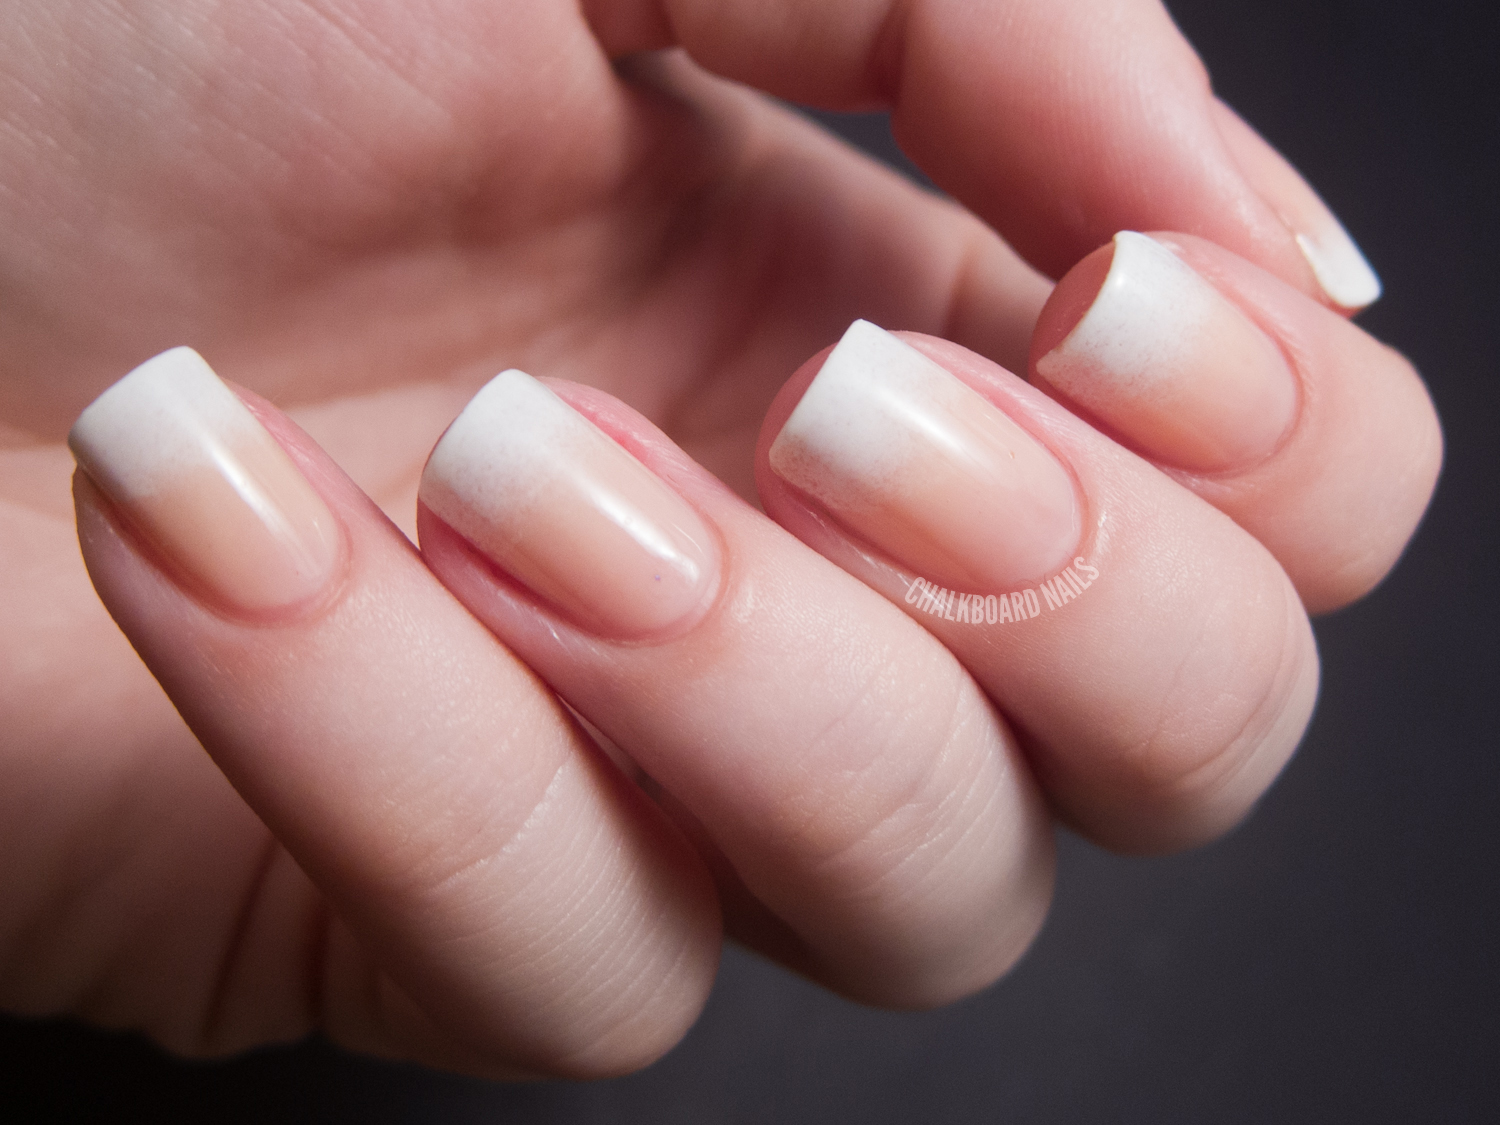 1. French manicure with colored tips - wide 2